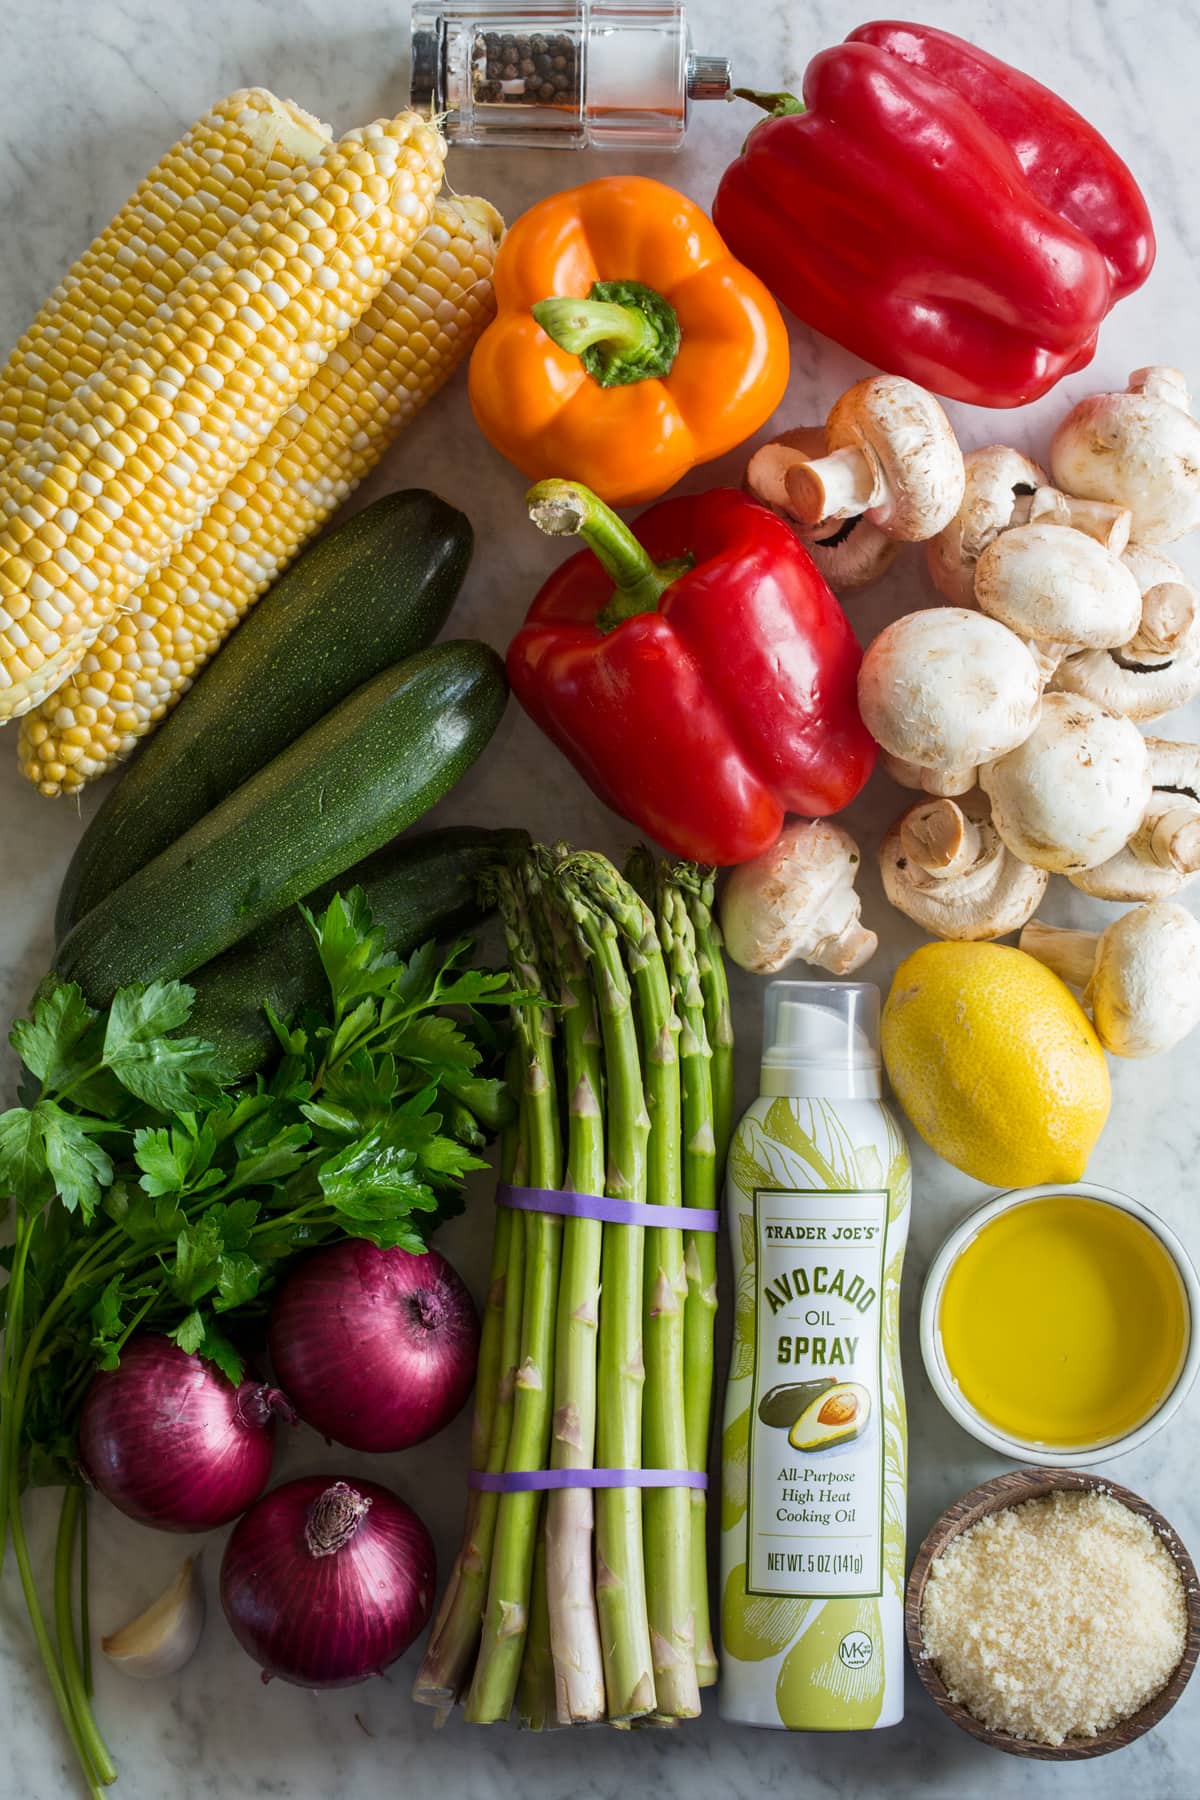 Photo of ingredients for grilled vegetables.